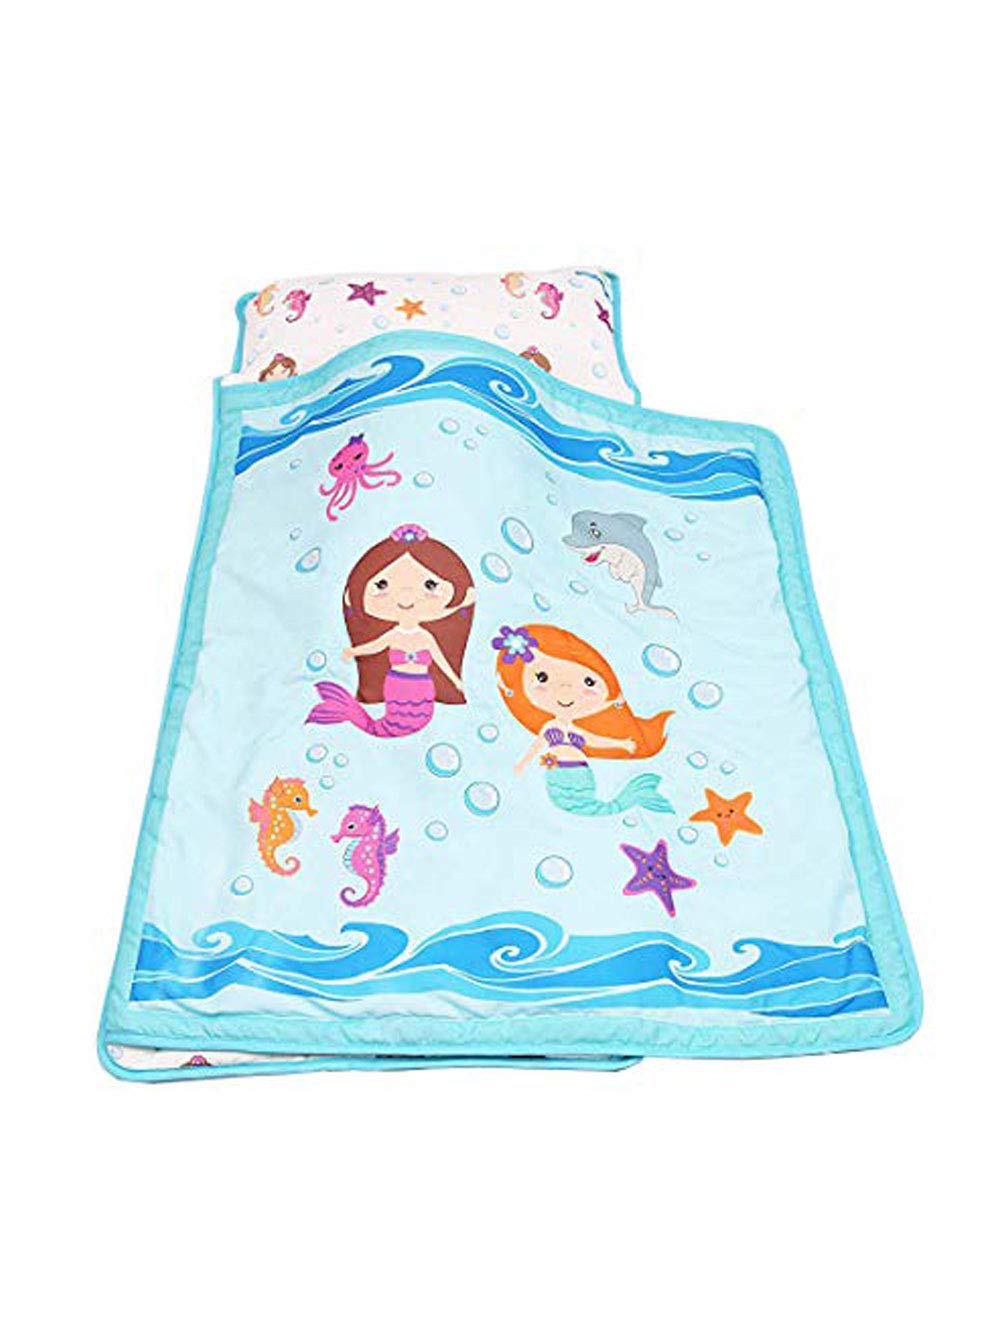 Book Cover EVERYDAY KIDS Toddler Nap Mat with Removable Pillow -Underwater Mermaids- Carry Handle with Fastening Straps Closure, Rollup Design, Soft Microfiber for Preschool, Daycare Sleeping Bag, Ages 2-6 years